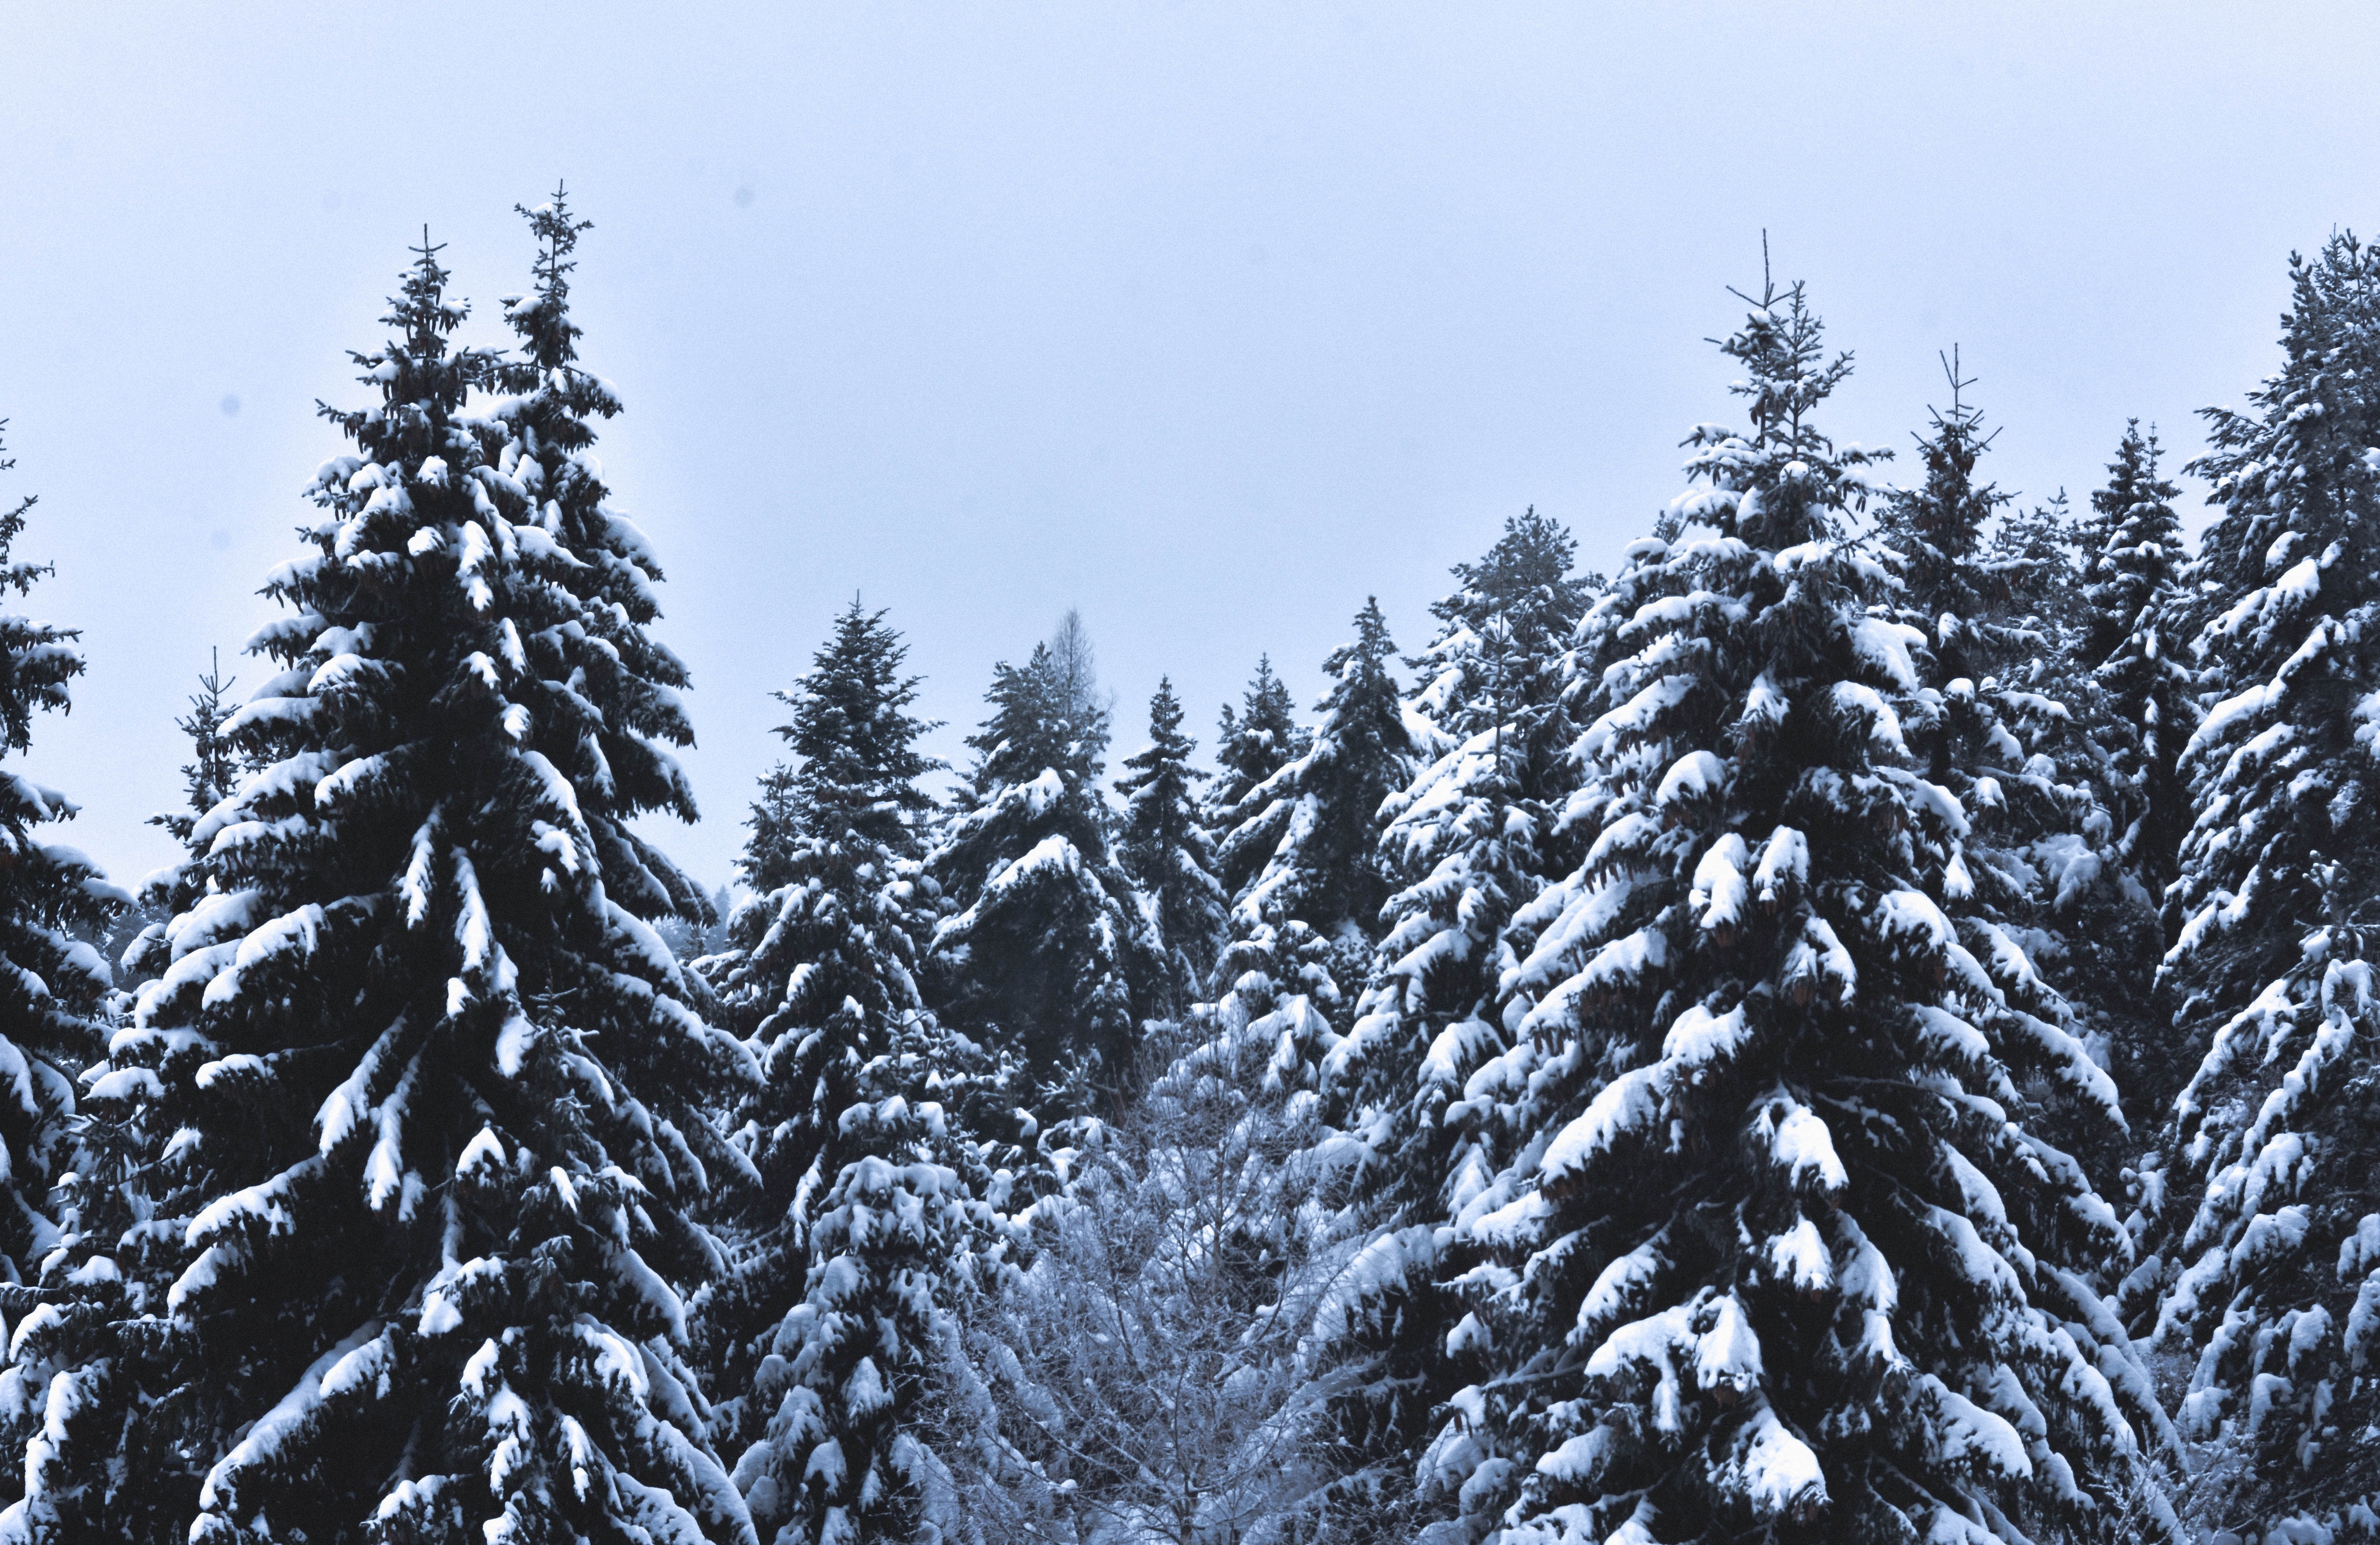 Snow covered pine trees under cloudy sky photo